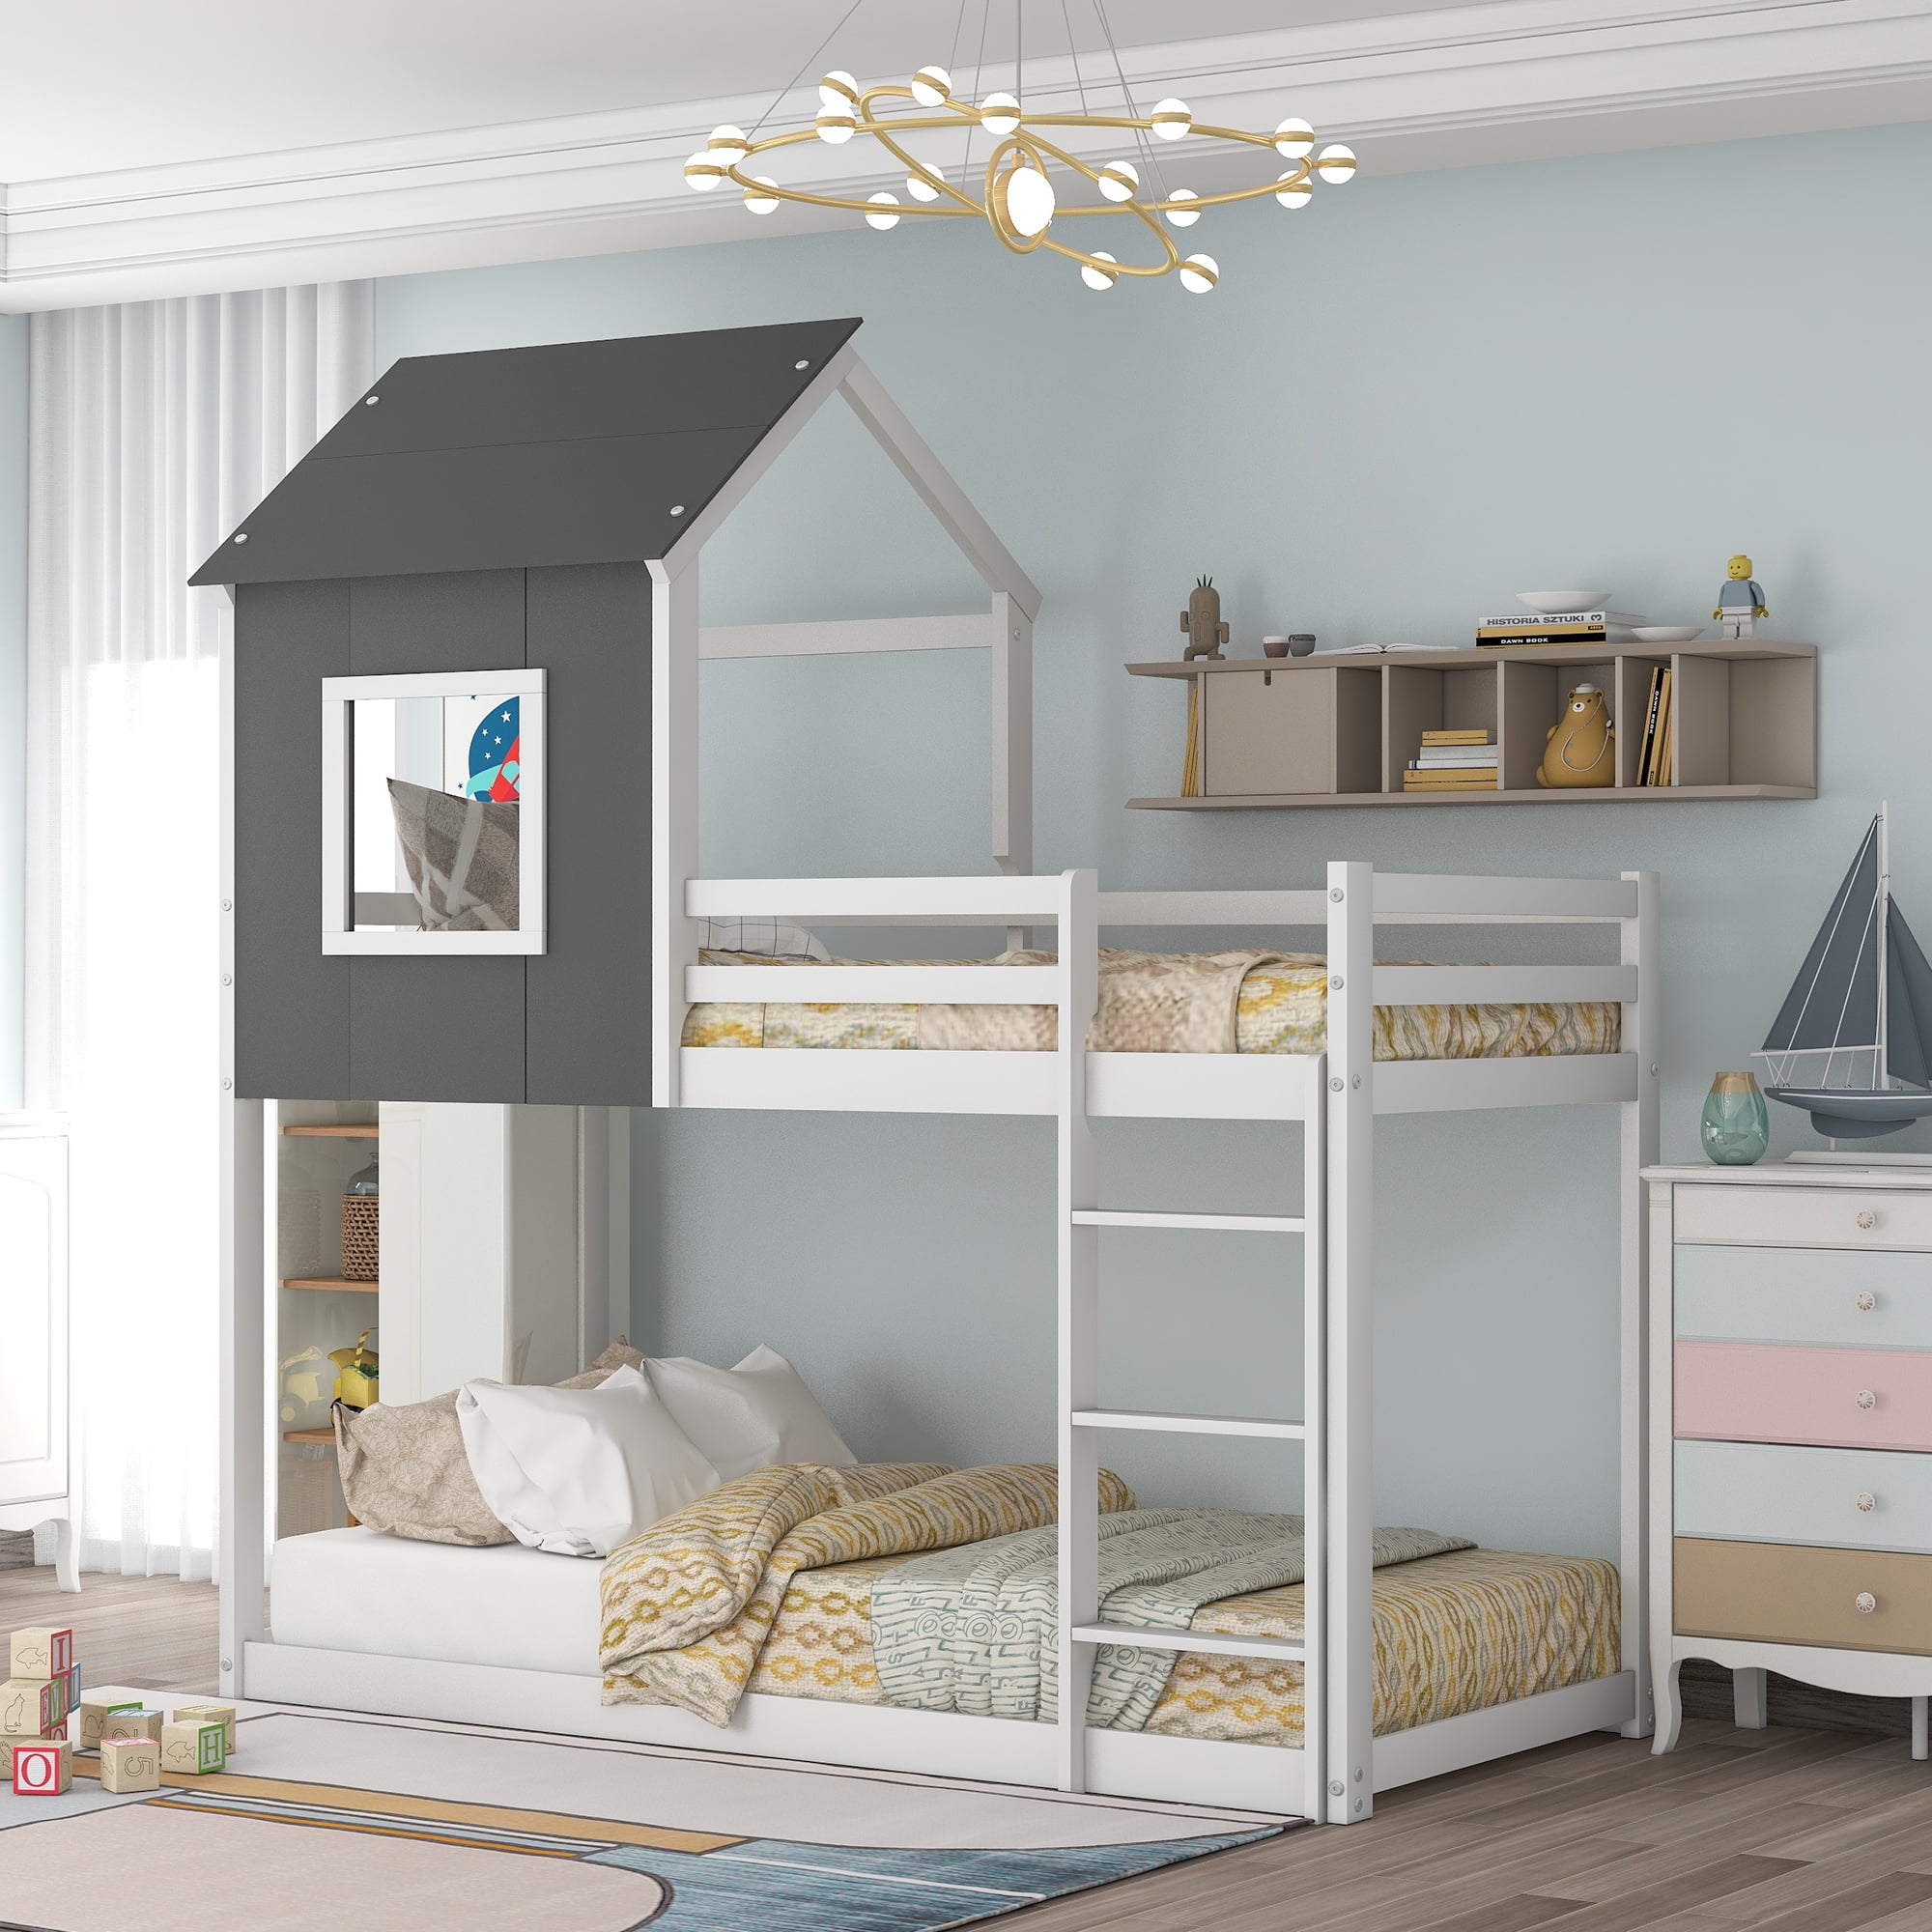 Storkcraft Caribou Twin Over Solid, Storkcraft White Bunk Bed